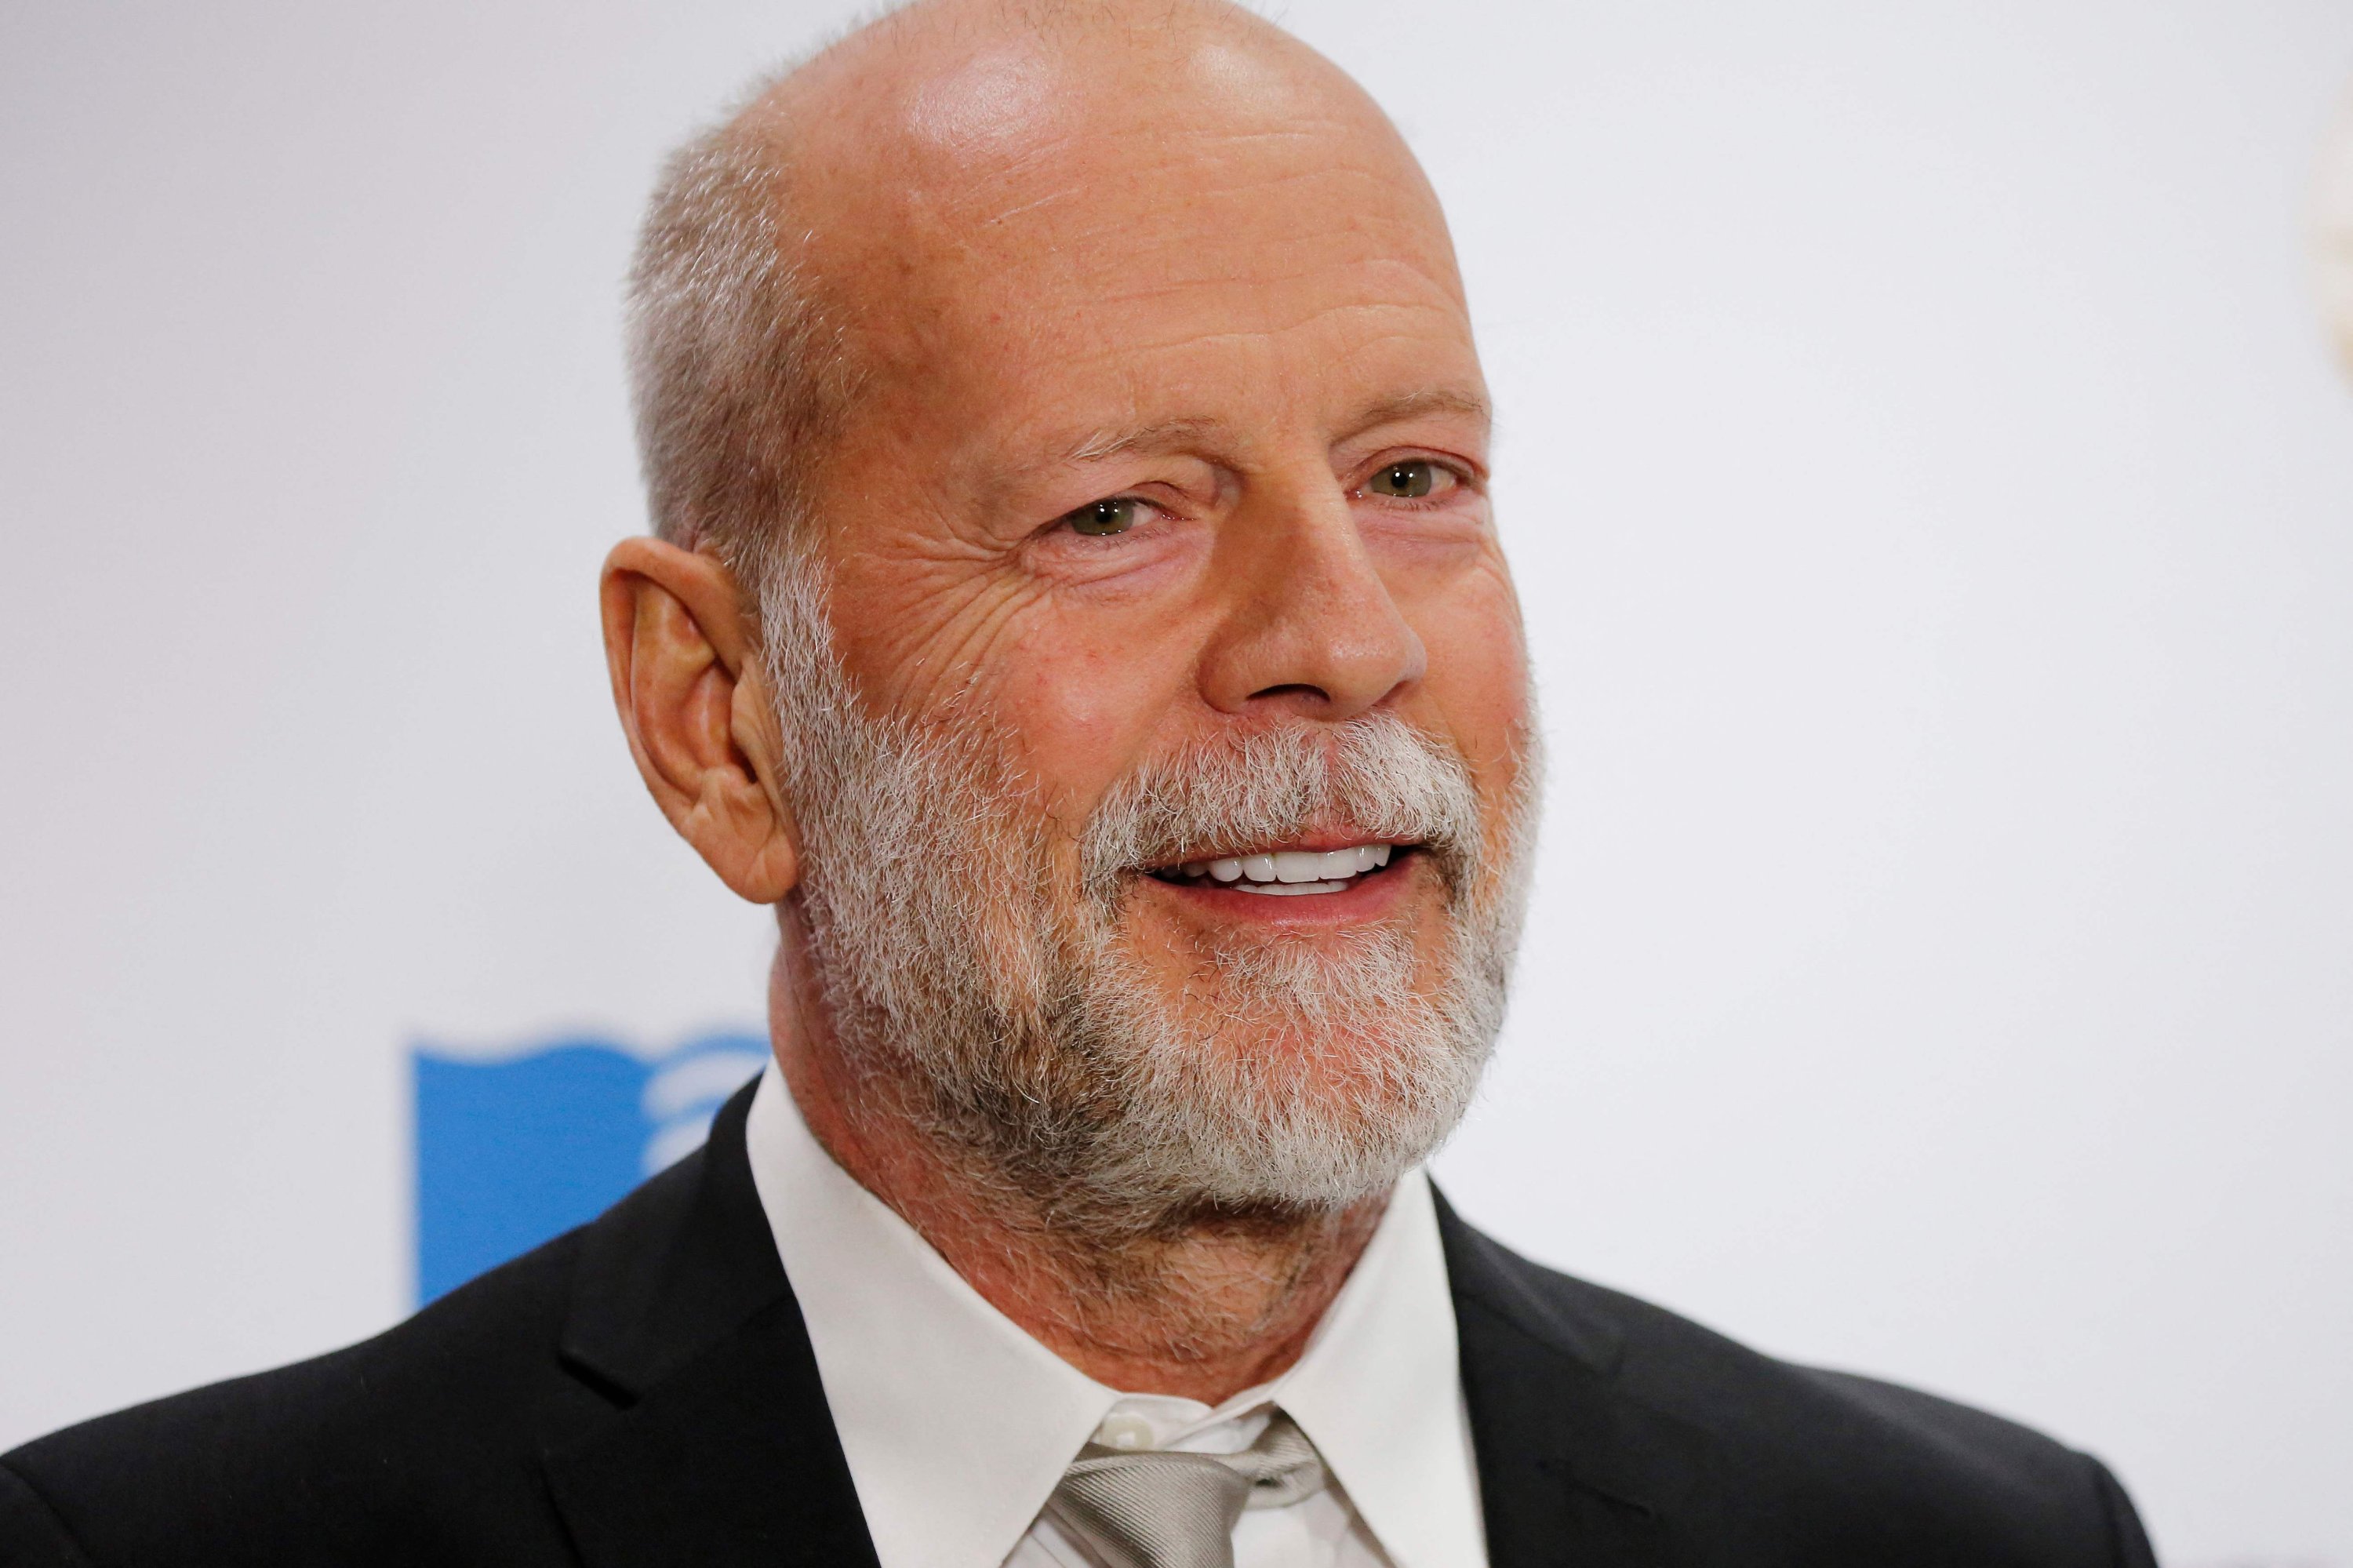 Hollywood actor Bruce Willis diagnosed with frontotemporal dementia